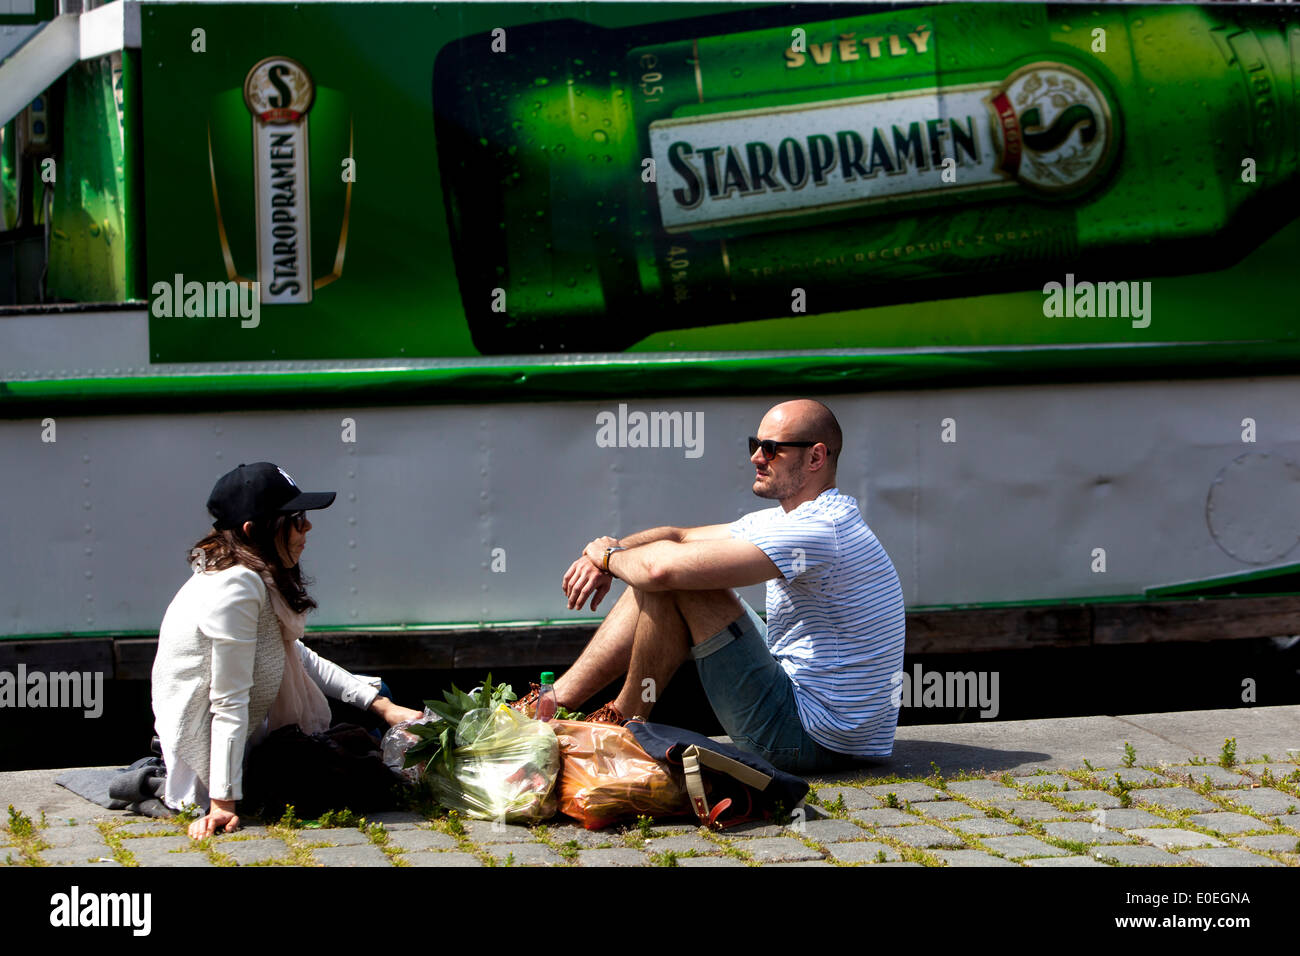 A picnic on the waterfront Advertisements for beer Staropramen Prague Czech Stock Photo